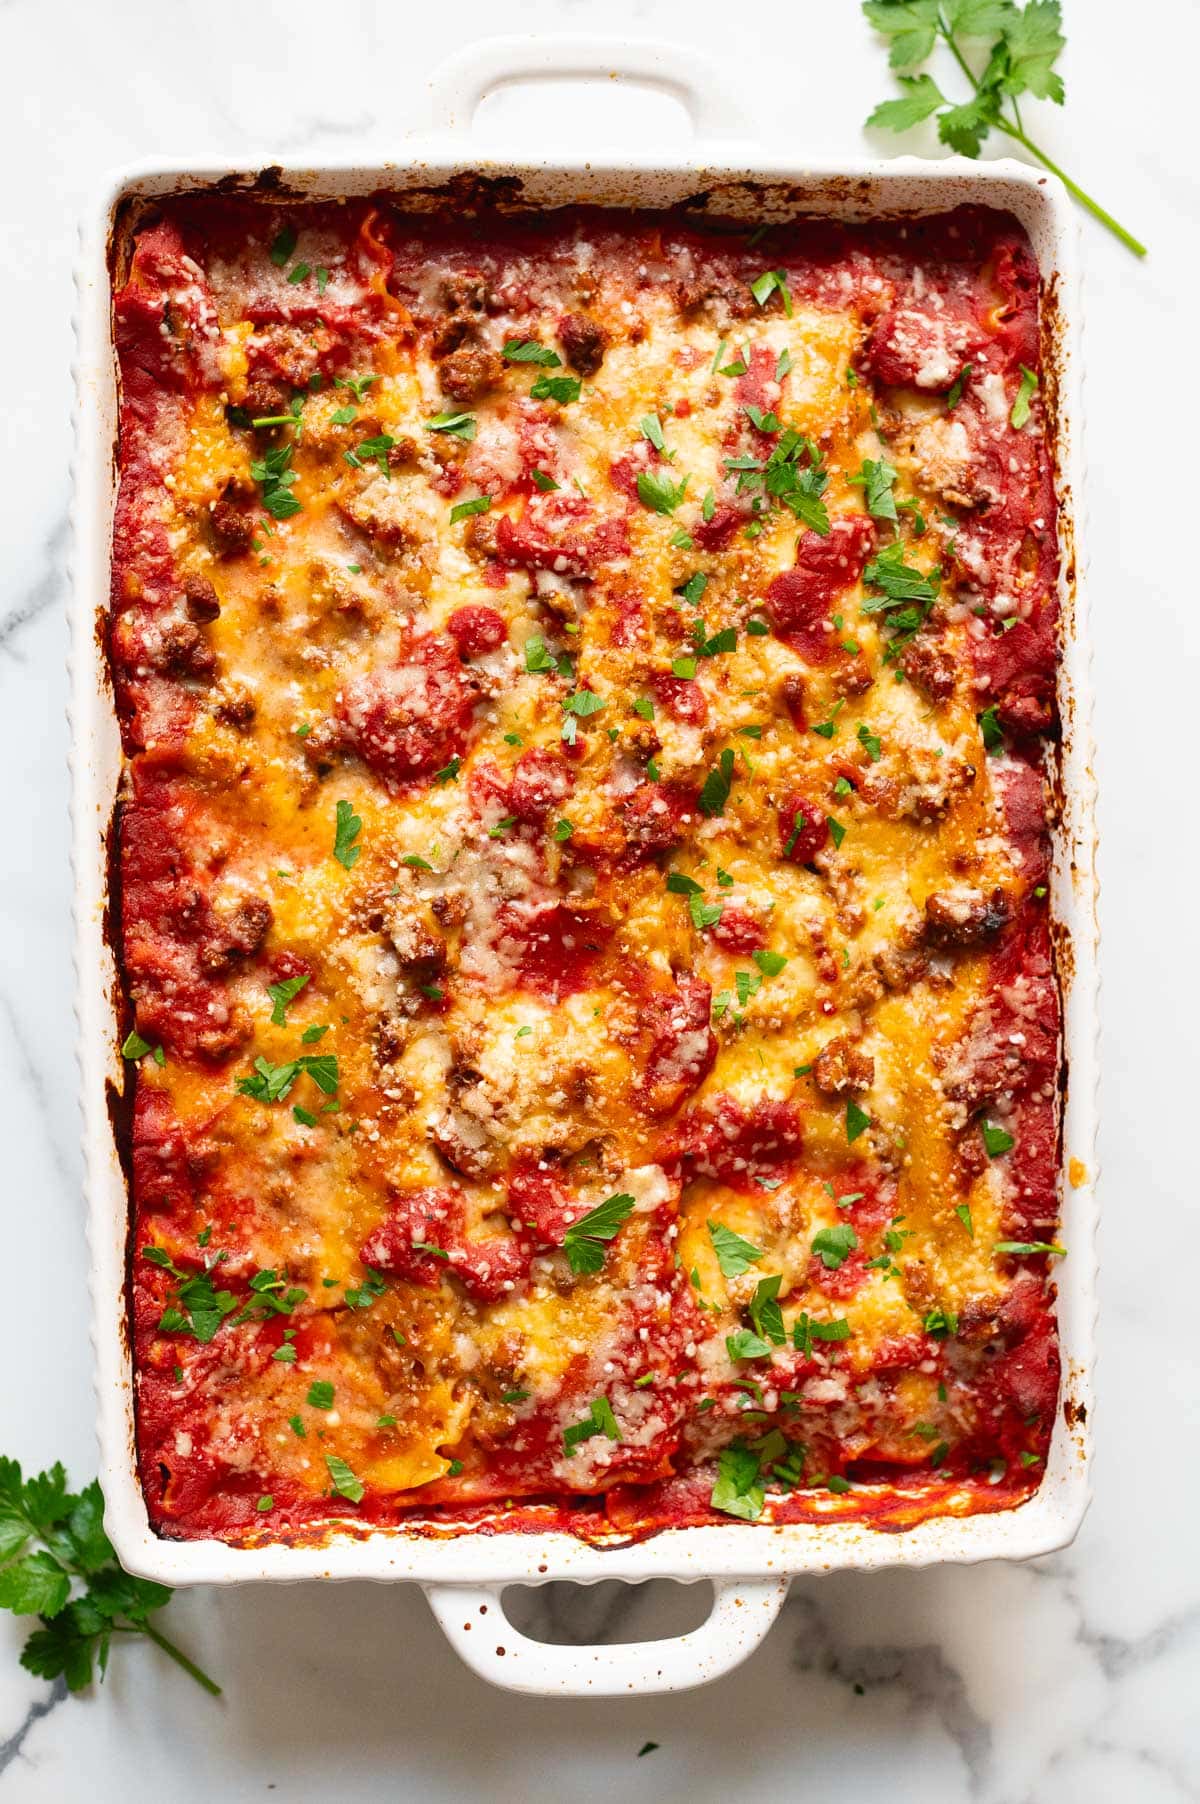 Baked cottage cheese lasagna garnished with parsley in a baking dish.